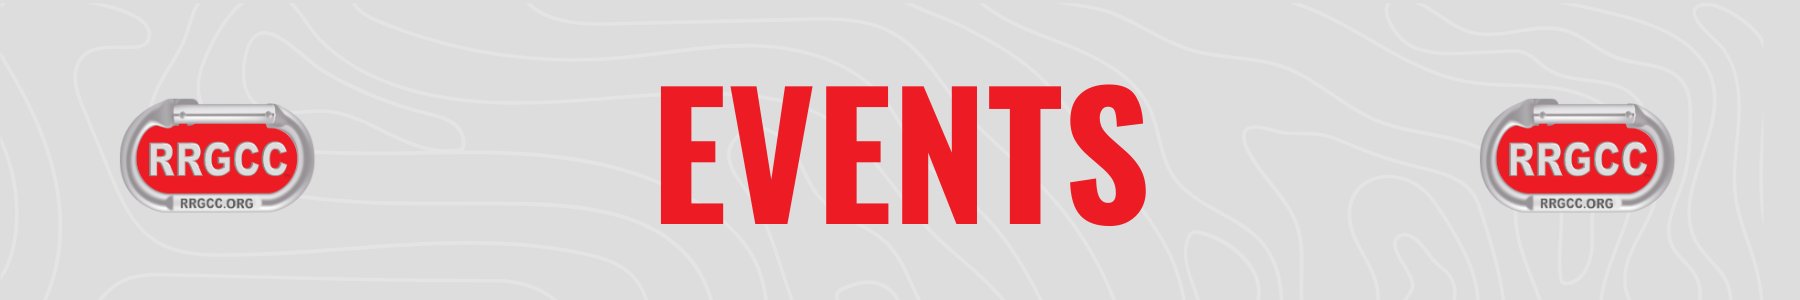 Events_Header